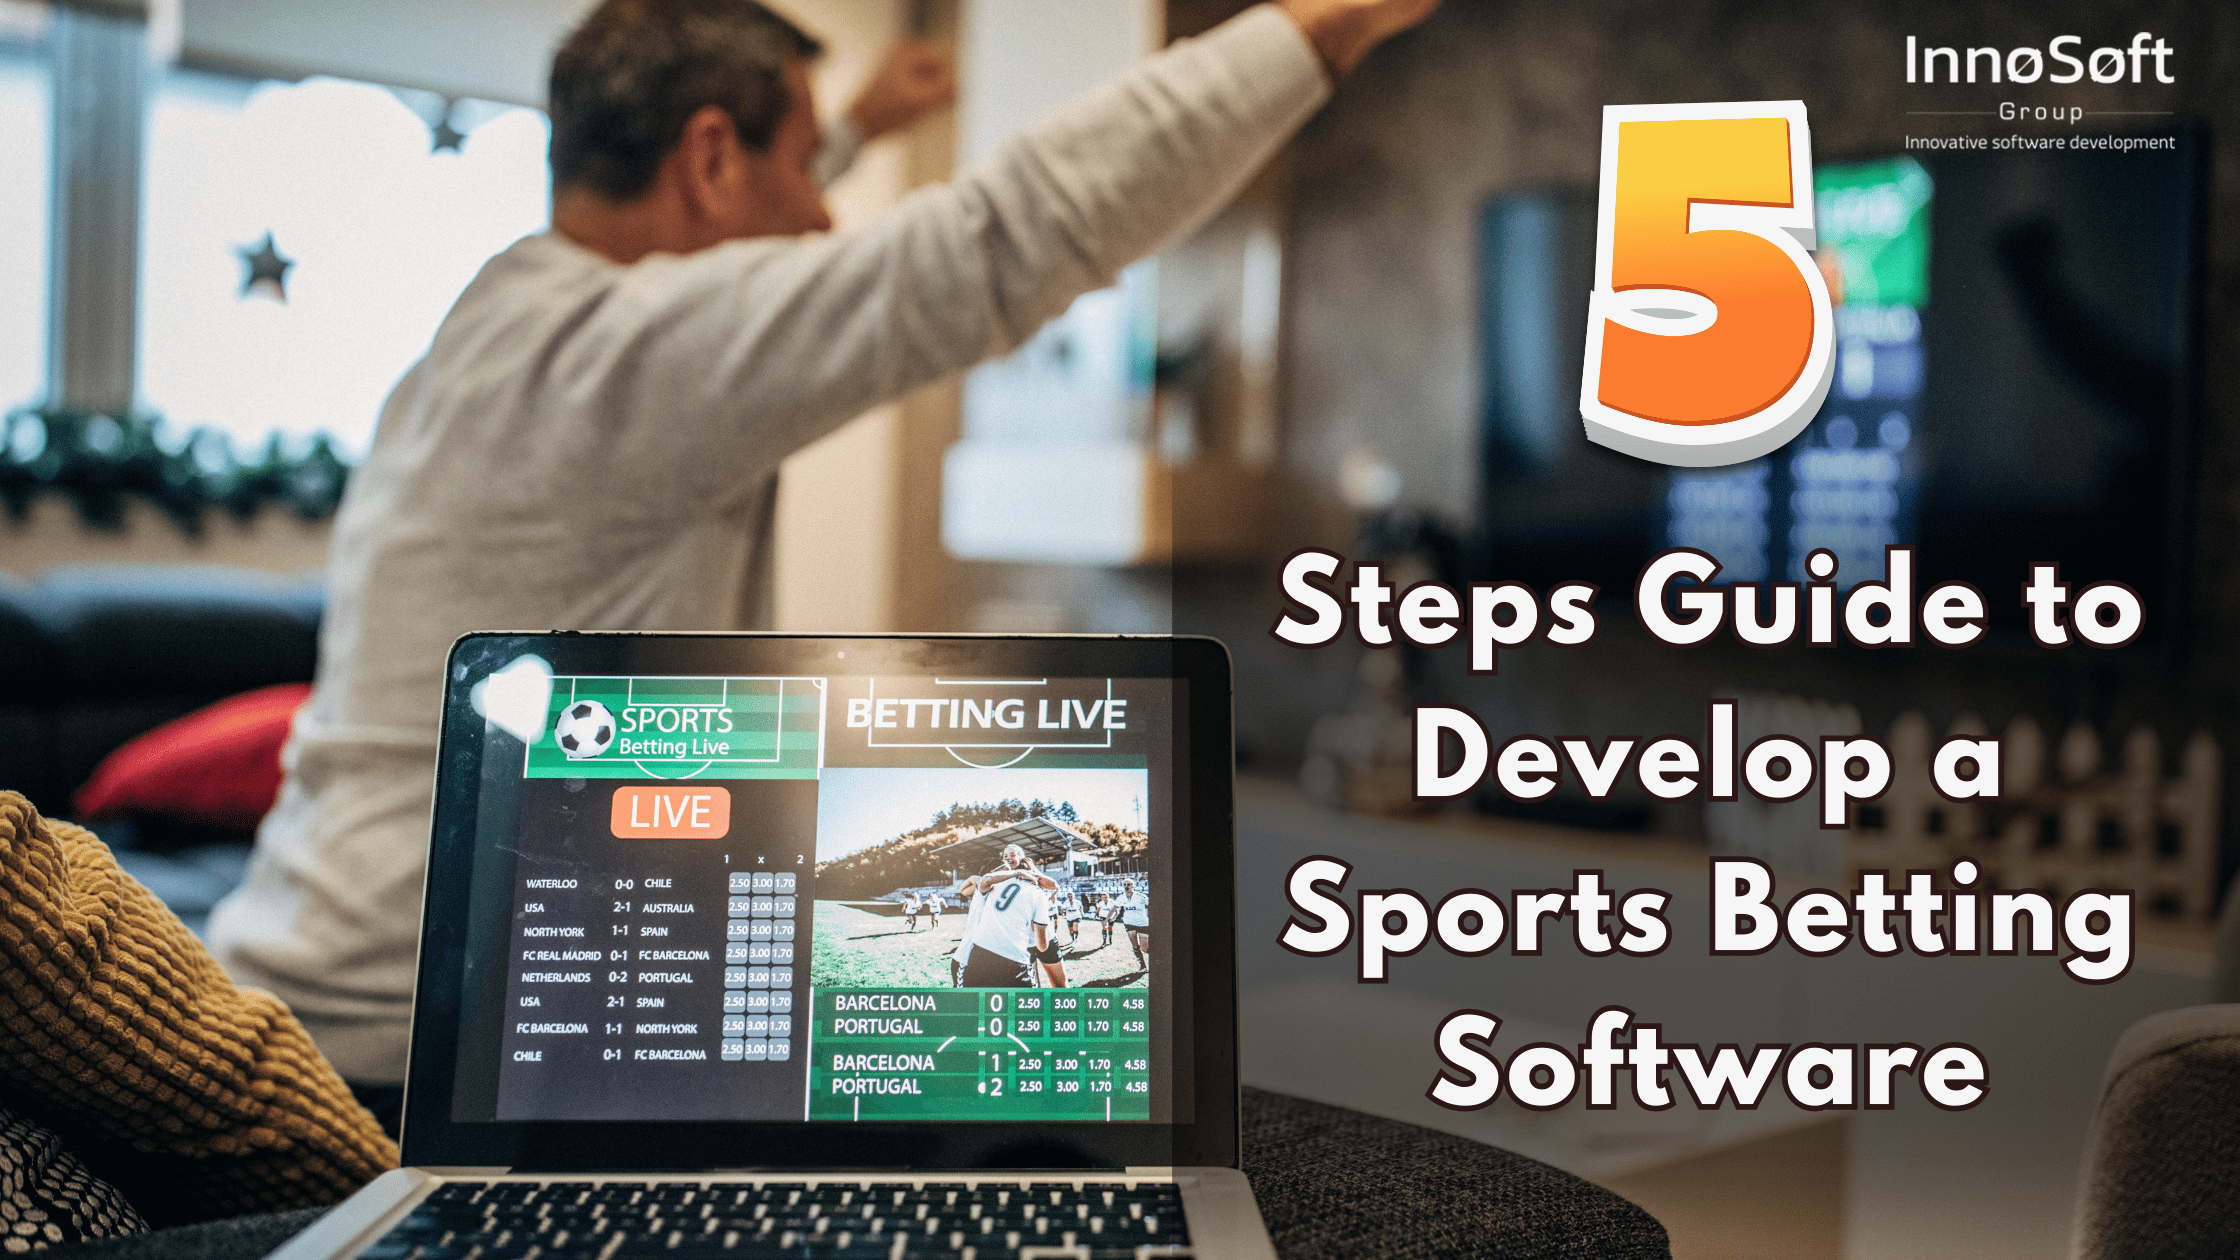 5 Steps Guide to Develop a Sports Betting Software